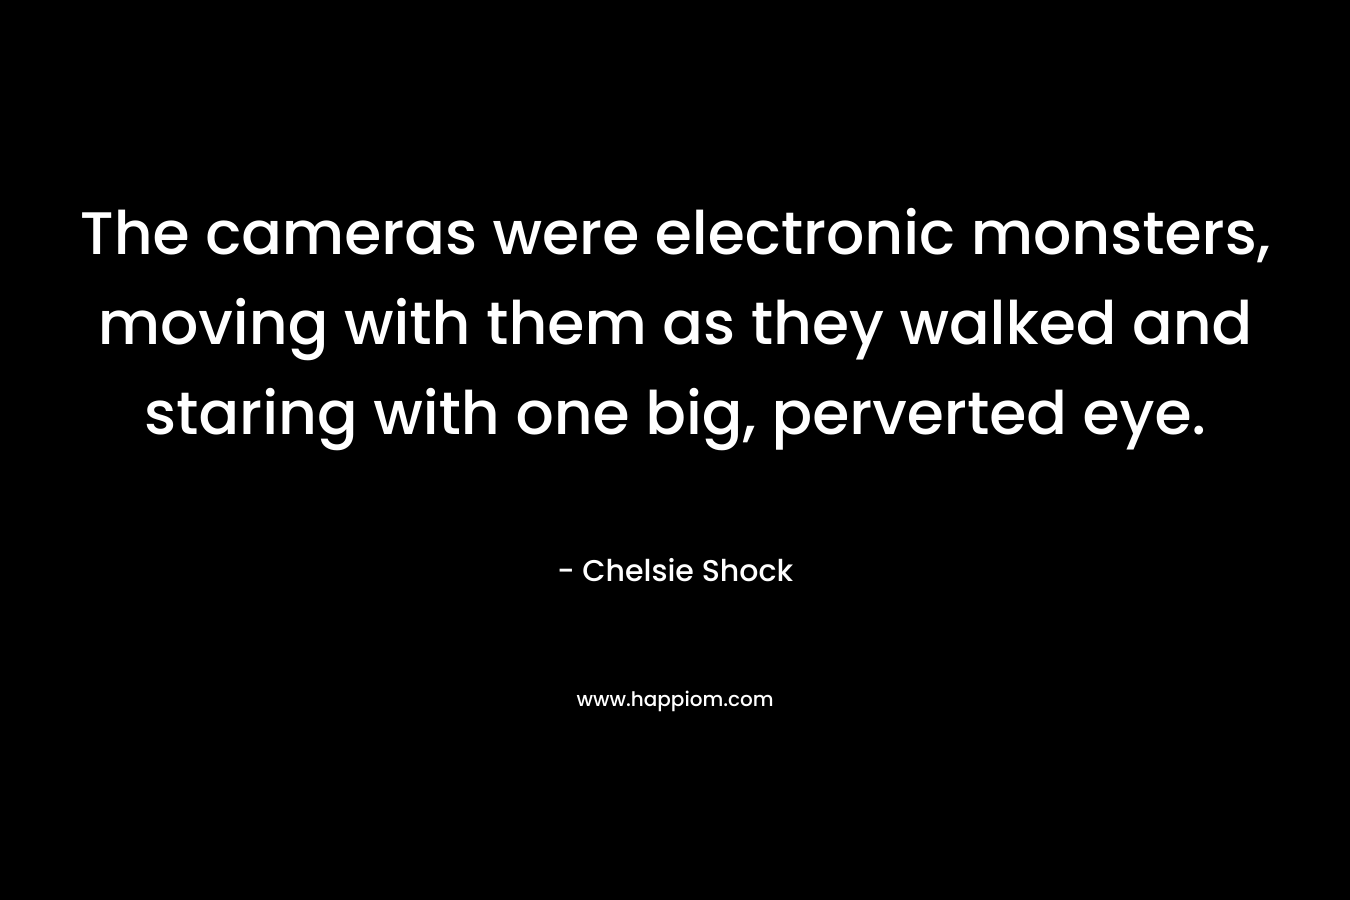 The cameras were electronic monsters, moving with them as they walked and staring with one big, perverted eye.